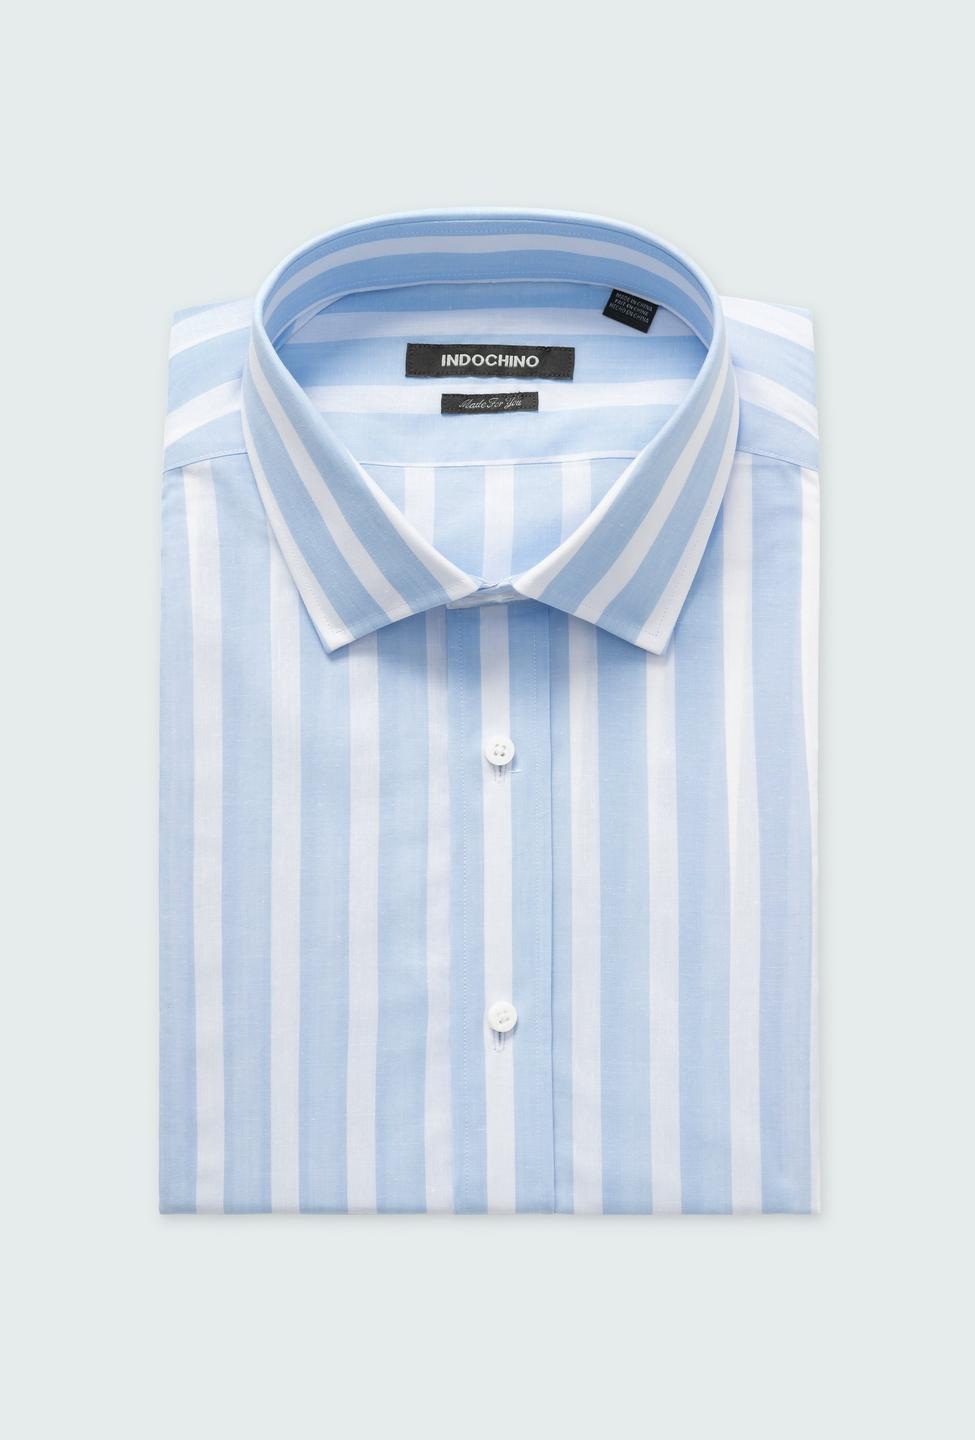 Blue shirt - Stroud Striped Design from Seasonal Indochino Collection